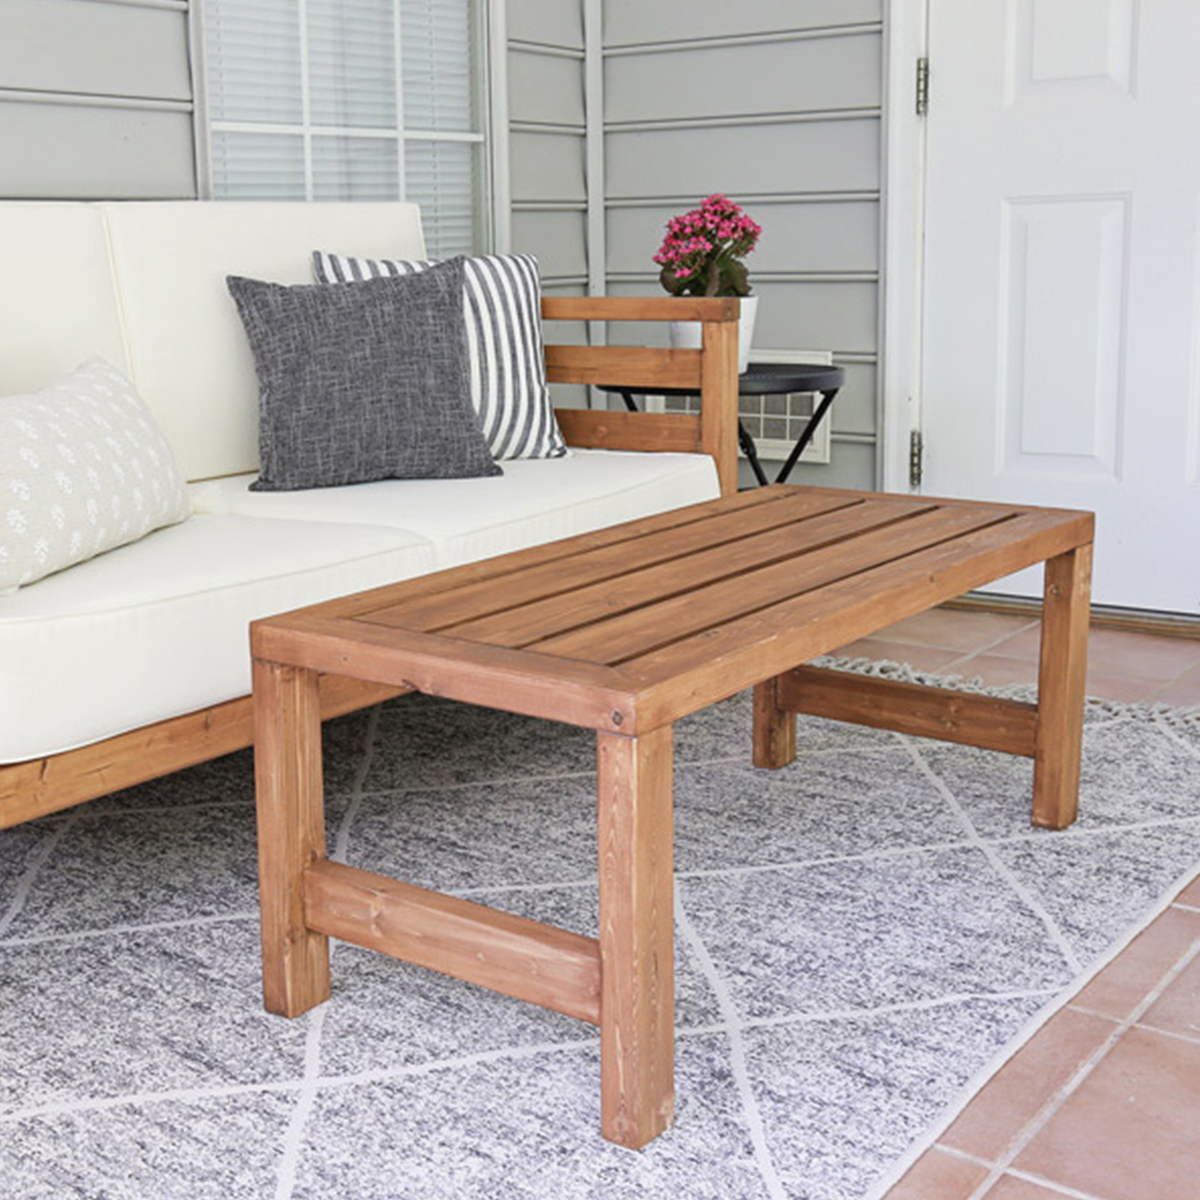 DIY outdoor coffee table stained